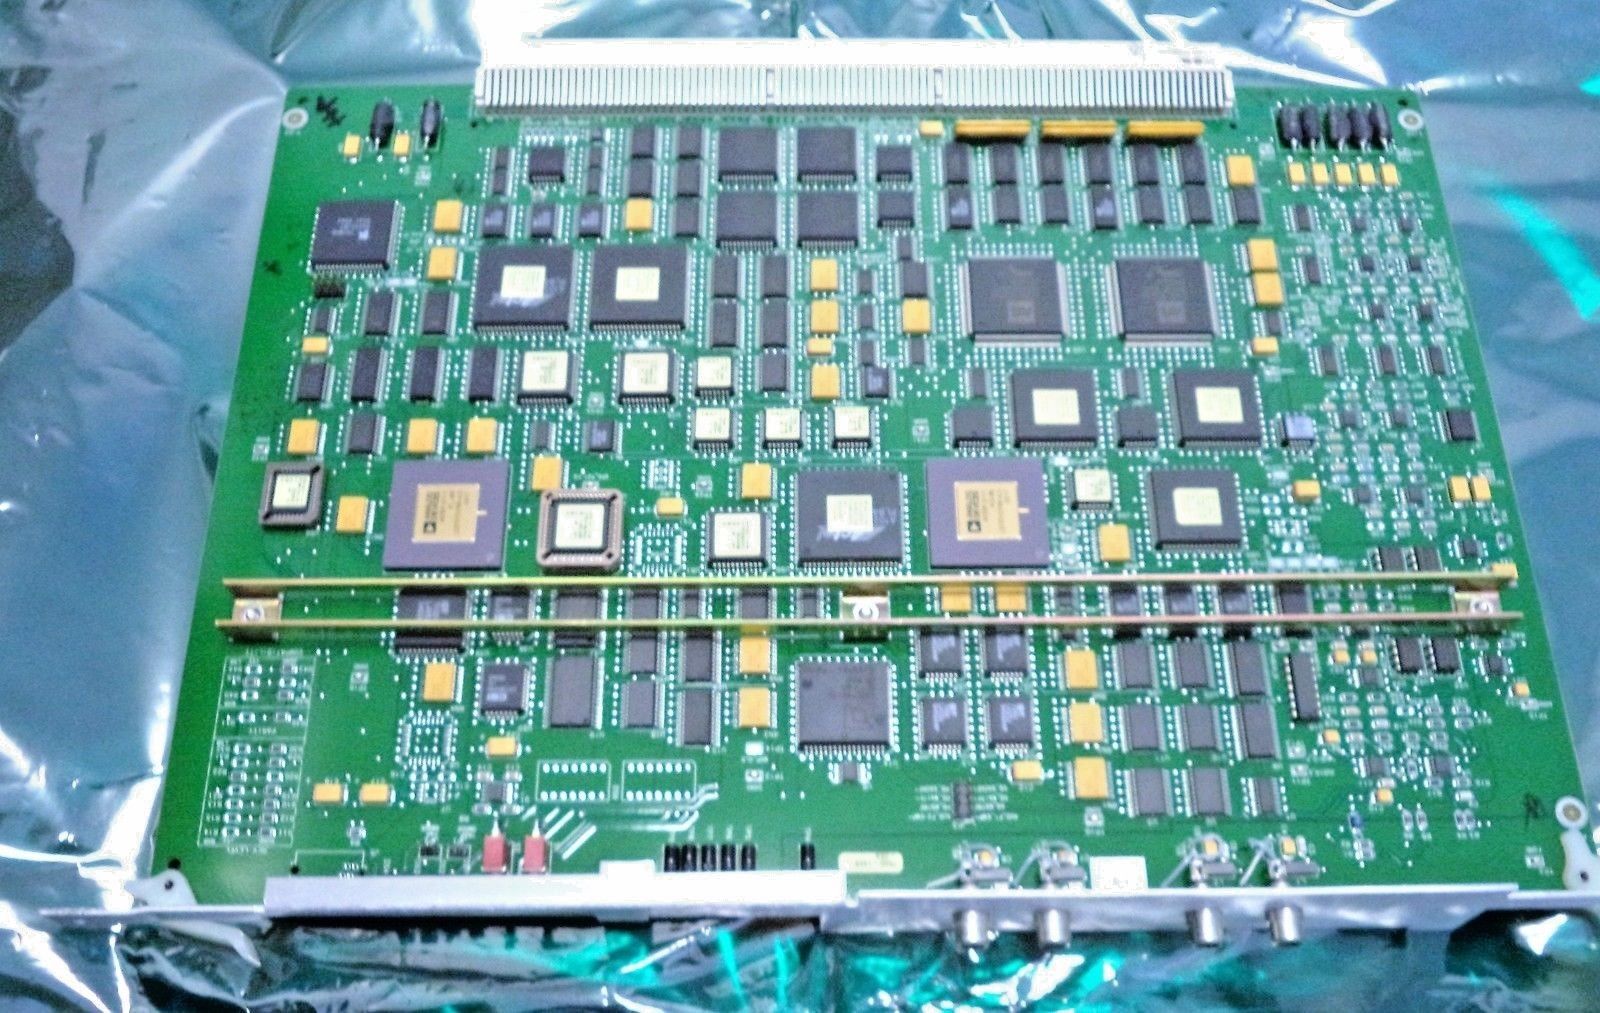 a close up of a computer board in a plastic bag